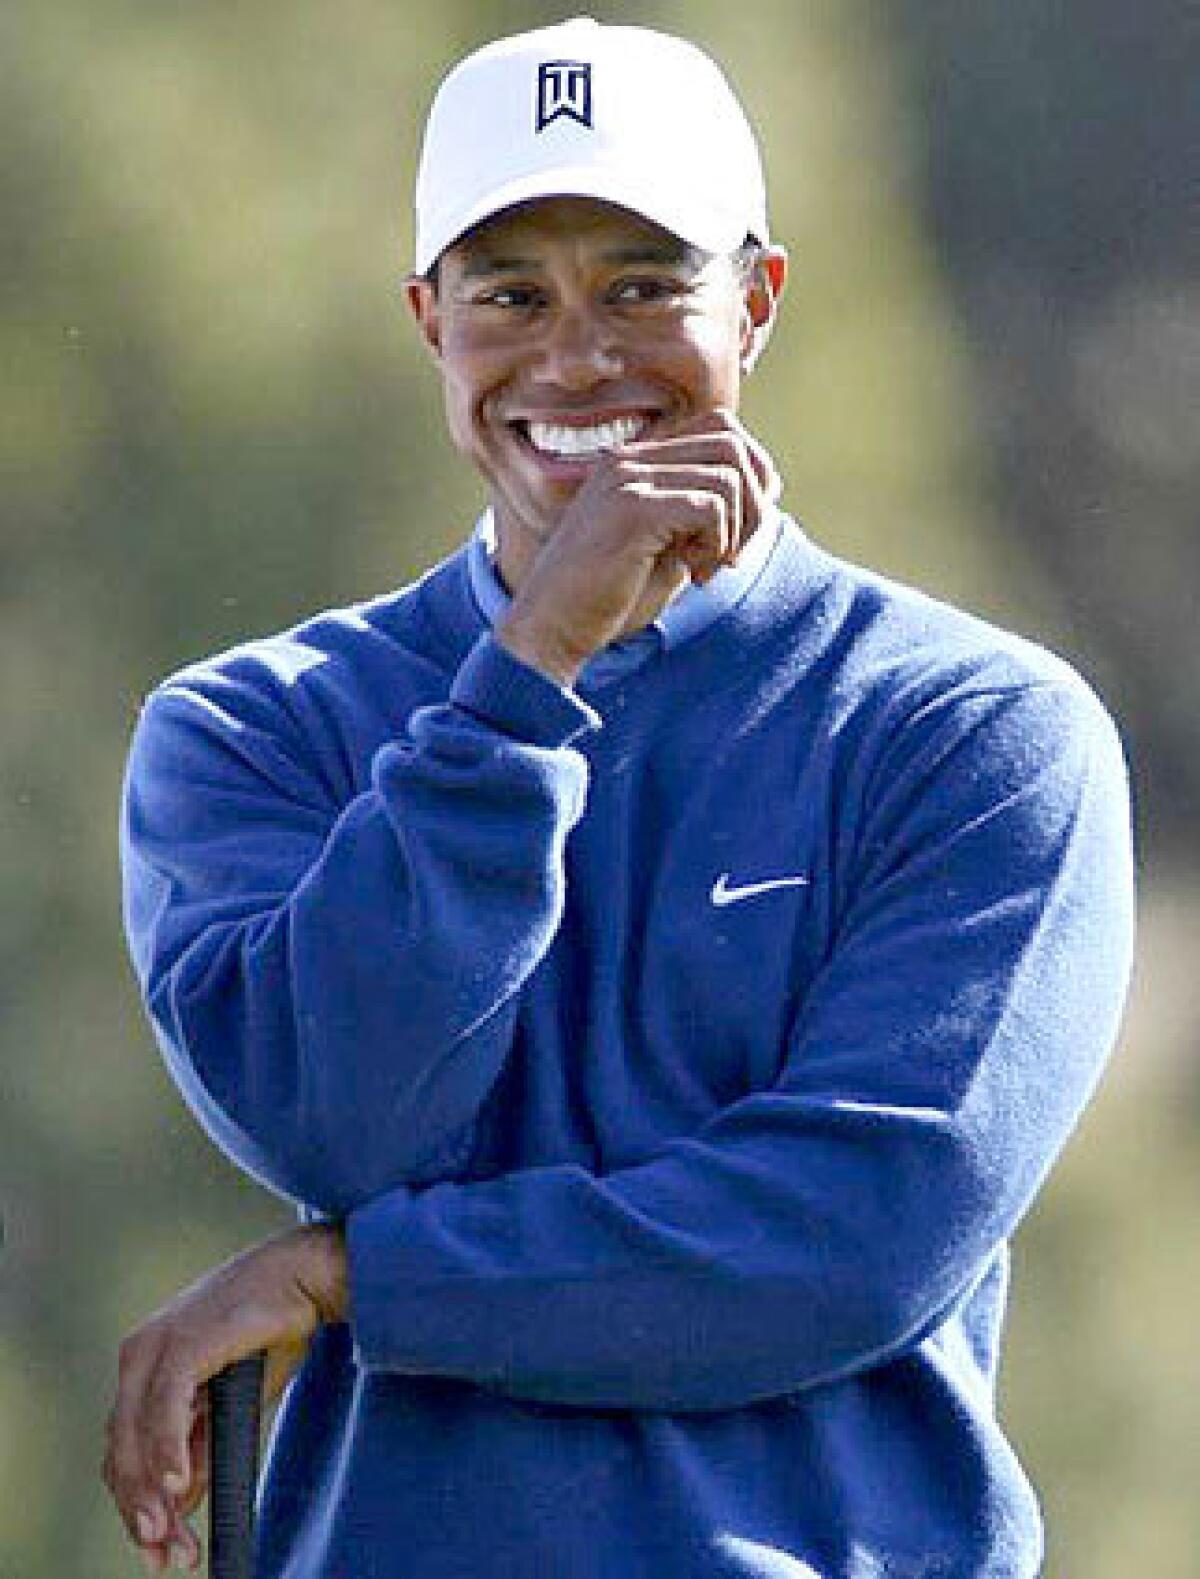 Tiger Woods, who grew up in Cypress and honed his game on Southland courses, smiles before hitting his drive on the 18th hole of the South Course at Torrey Pines during the third round of the Buick Invitational golf tournament in San Diego on Jan. 27.